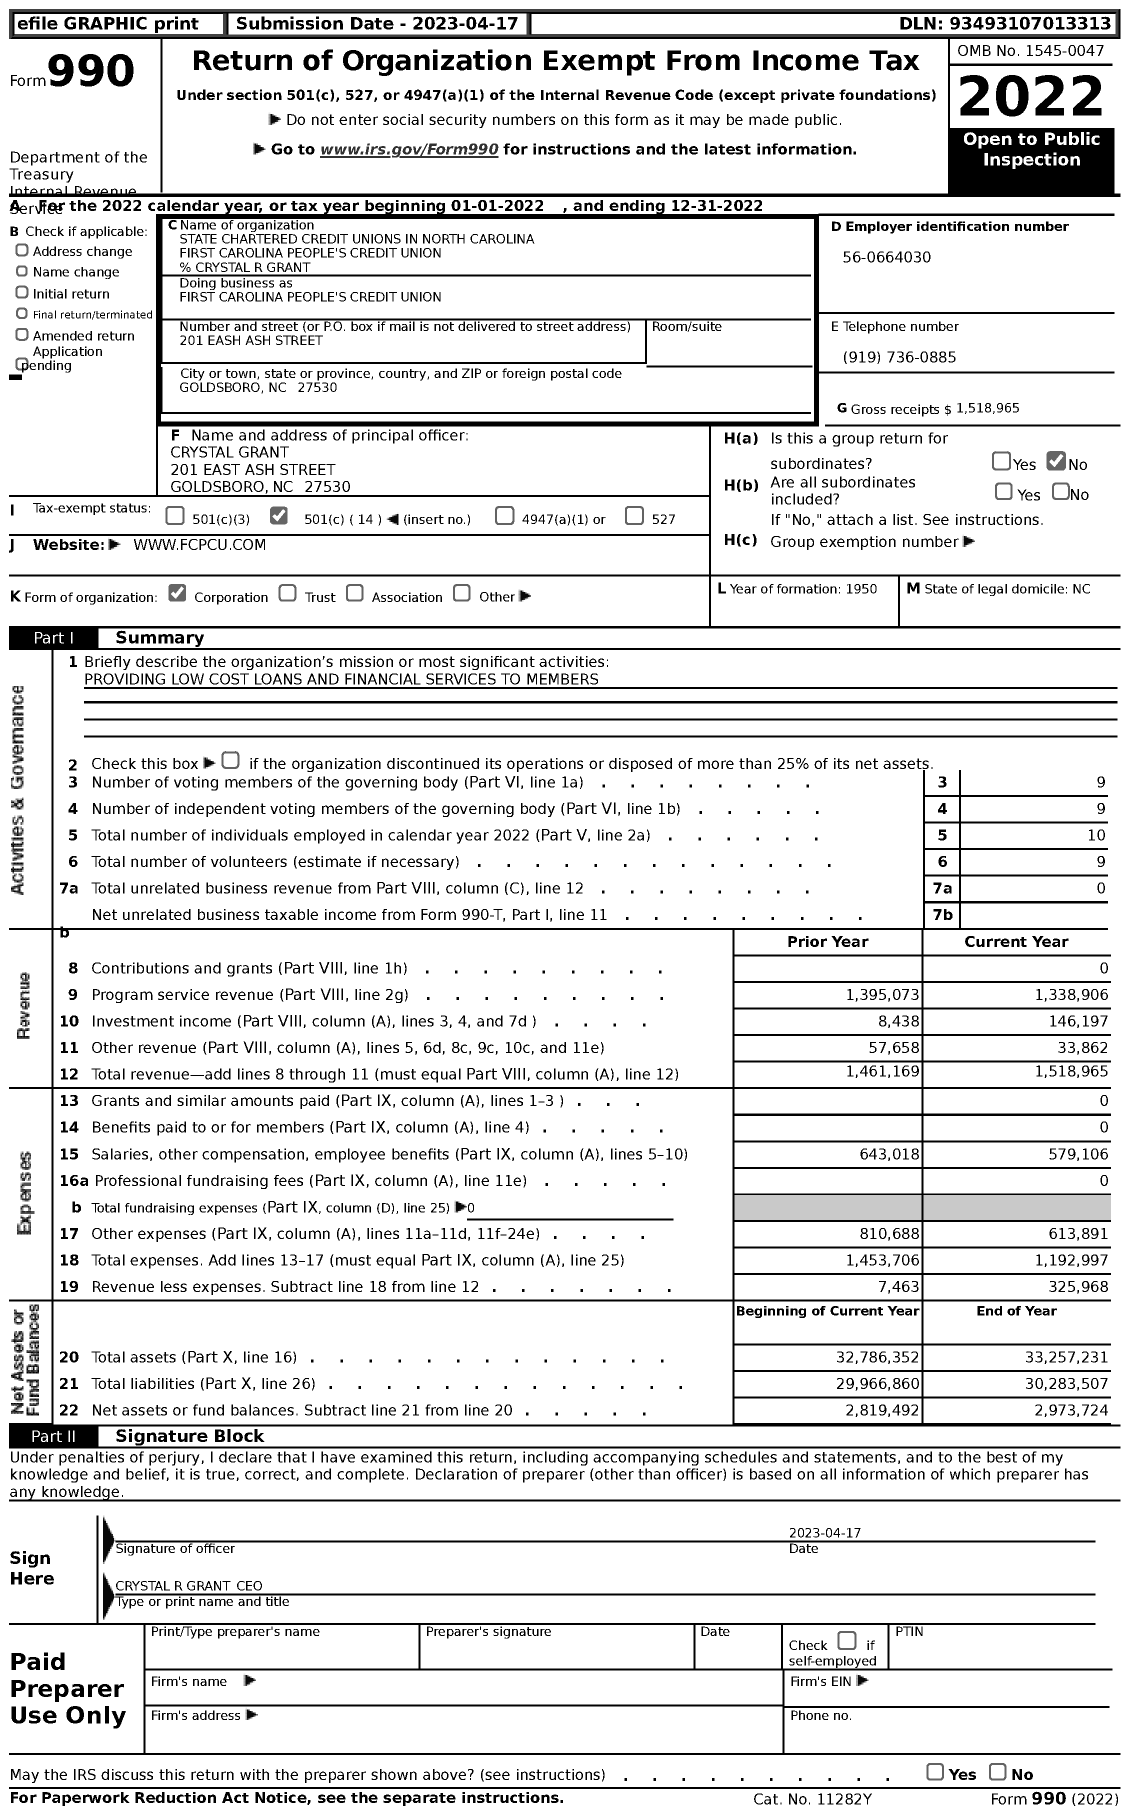 Image of first page of 2022 Form 990 for State Chartered Credit Unions in North Carolina First Carolina People's Credit Union